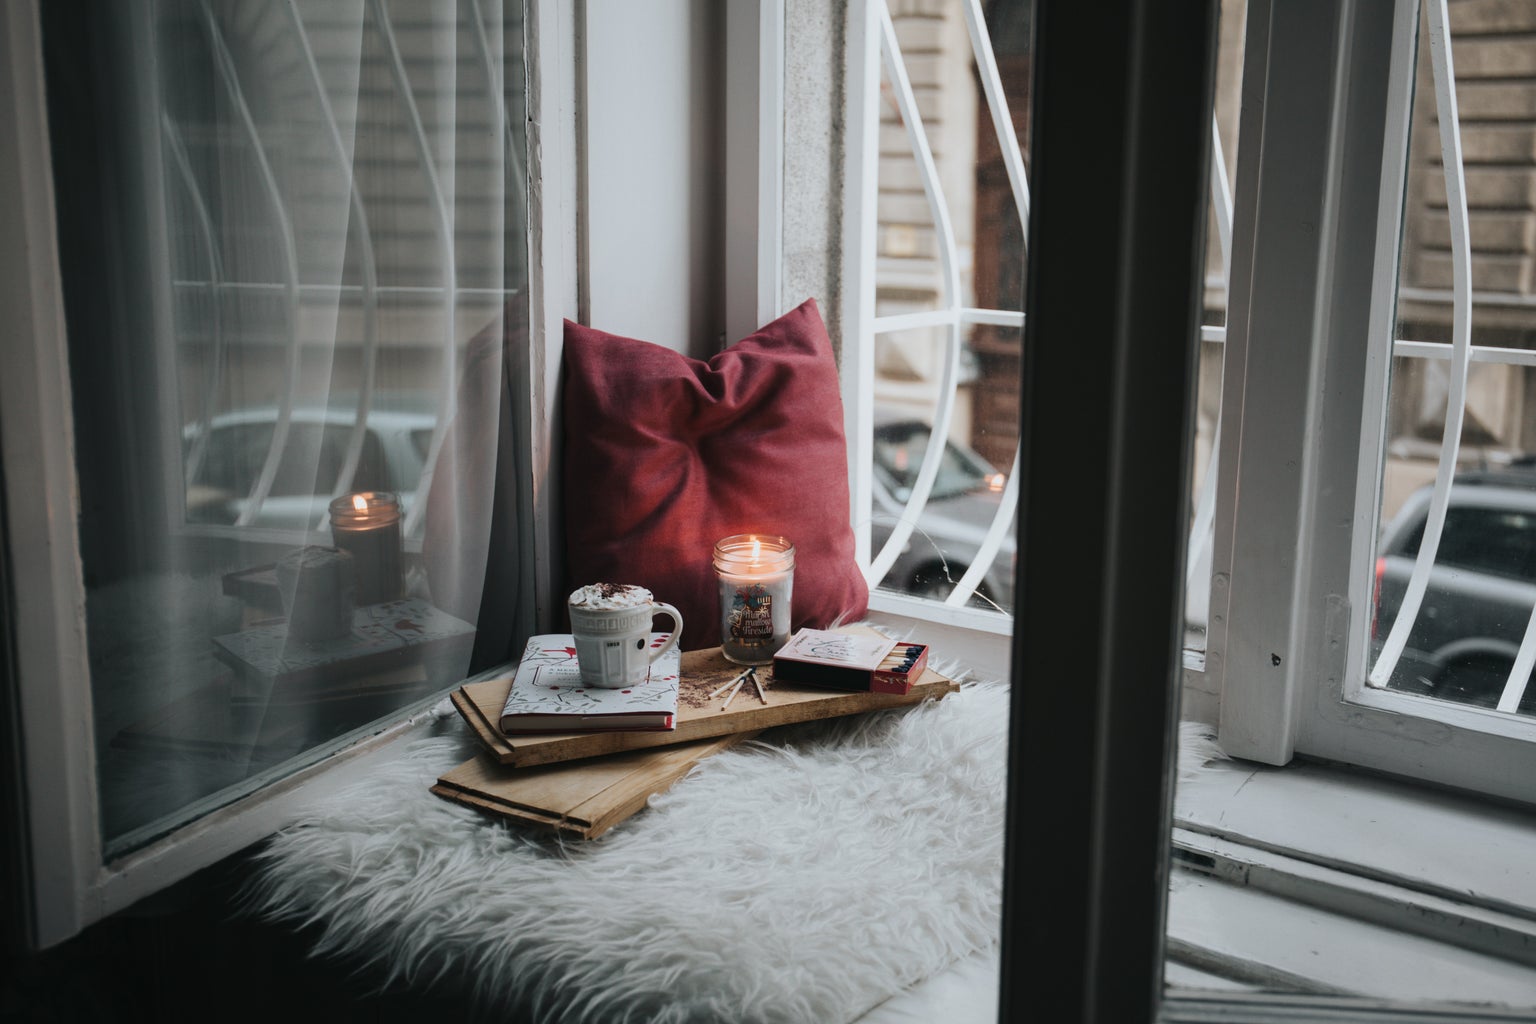 photo of a candle, matches, and a mug resting on pillows by a window